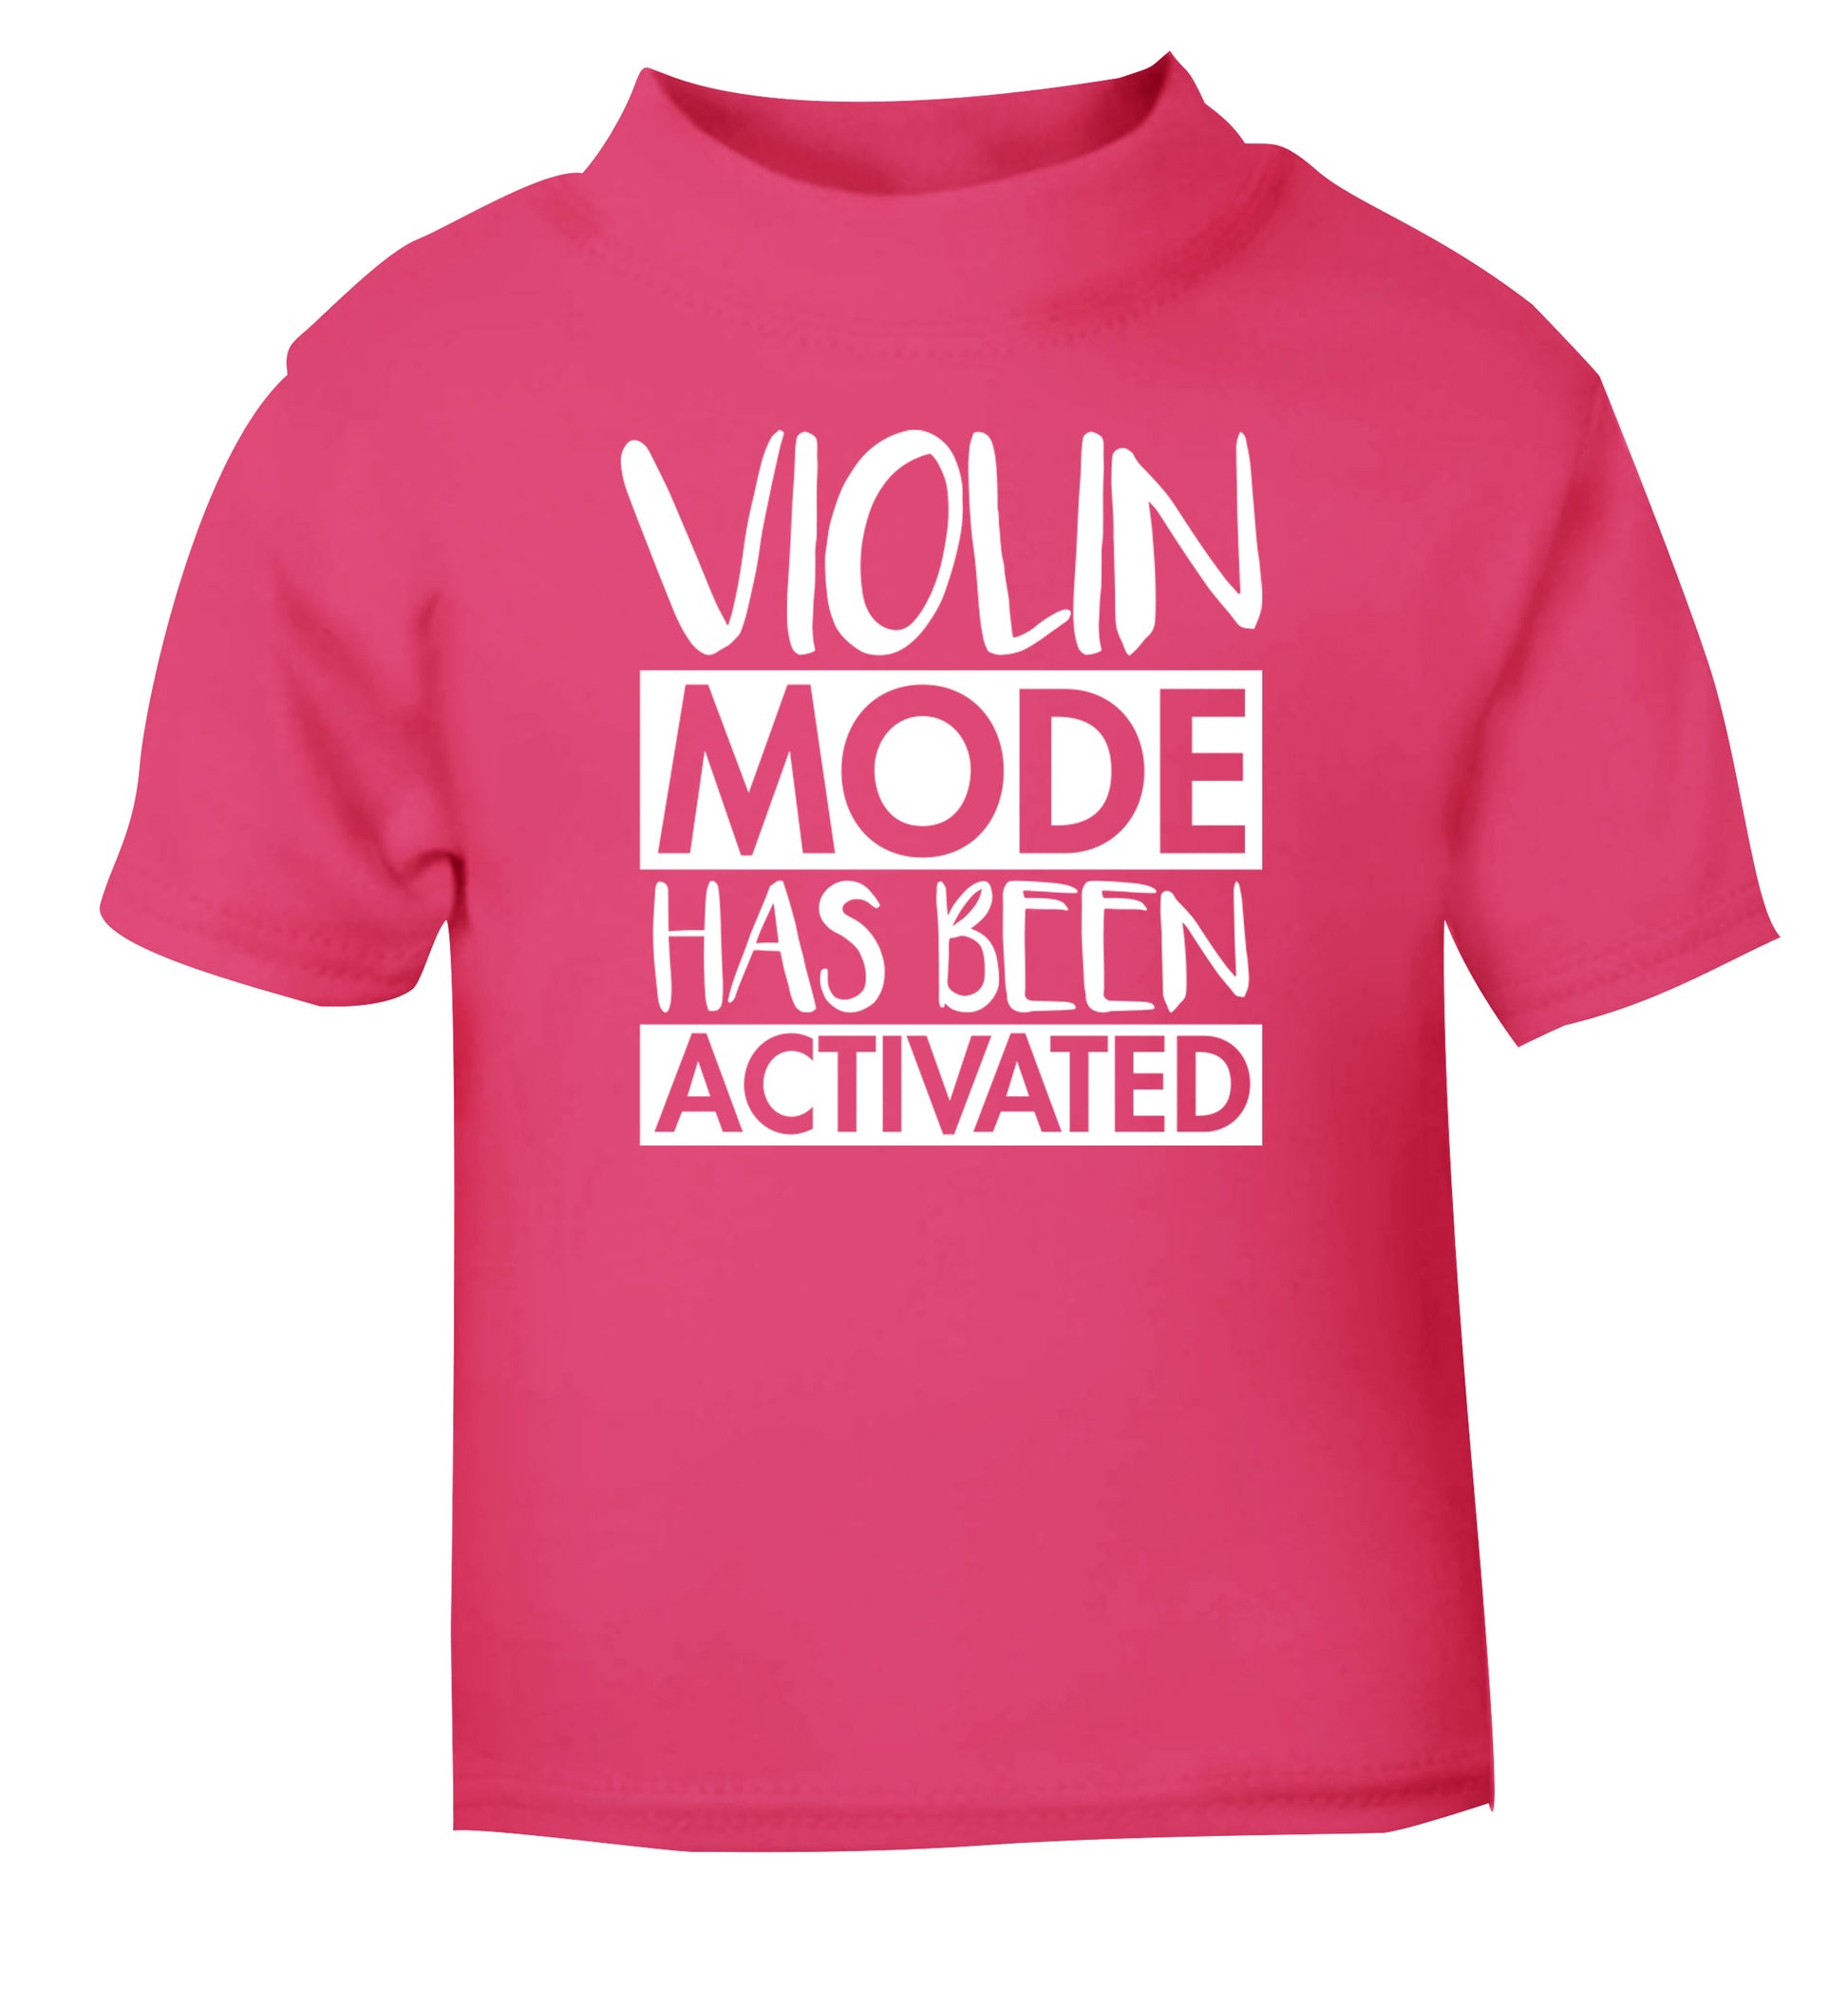 Violin Mode Activated pink Baby Toddler Tshirt 2 Years